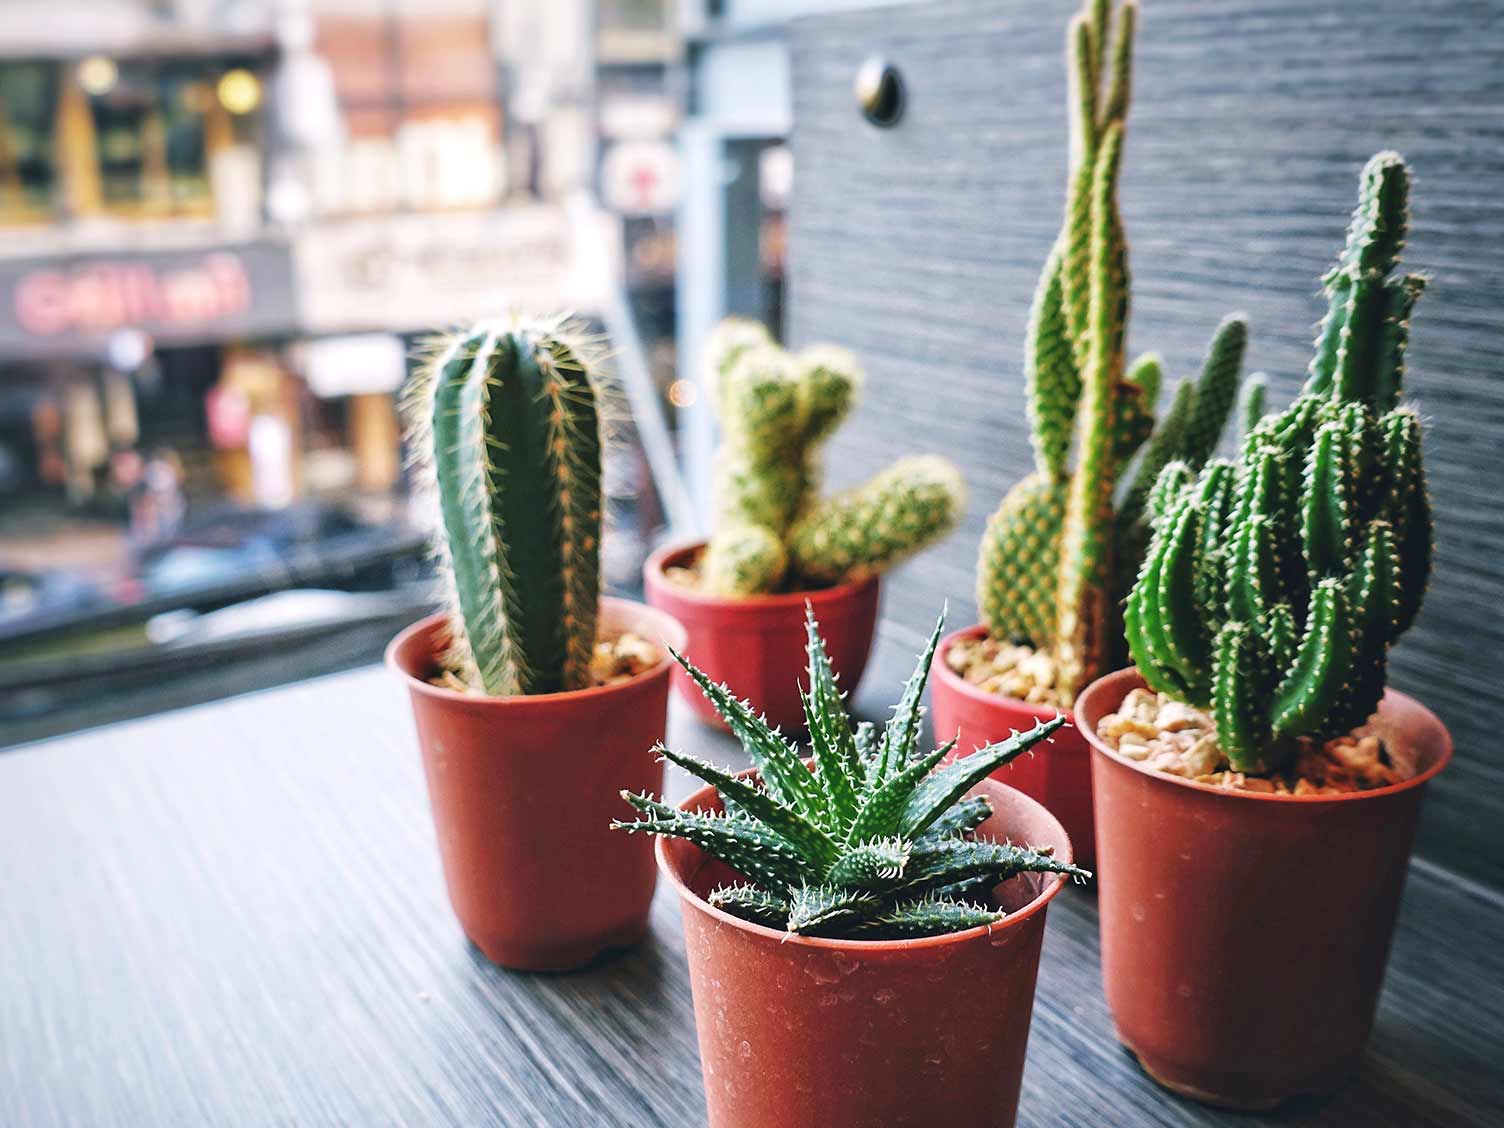 How To Look After A Cactus Plant | Love The Garden